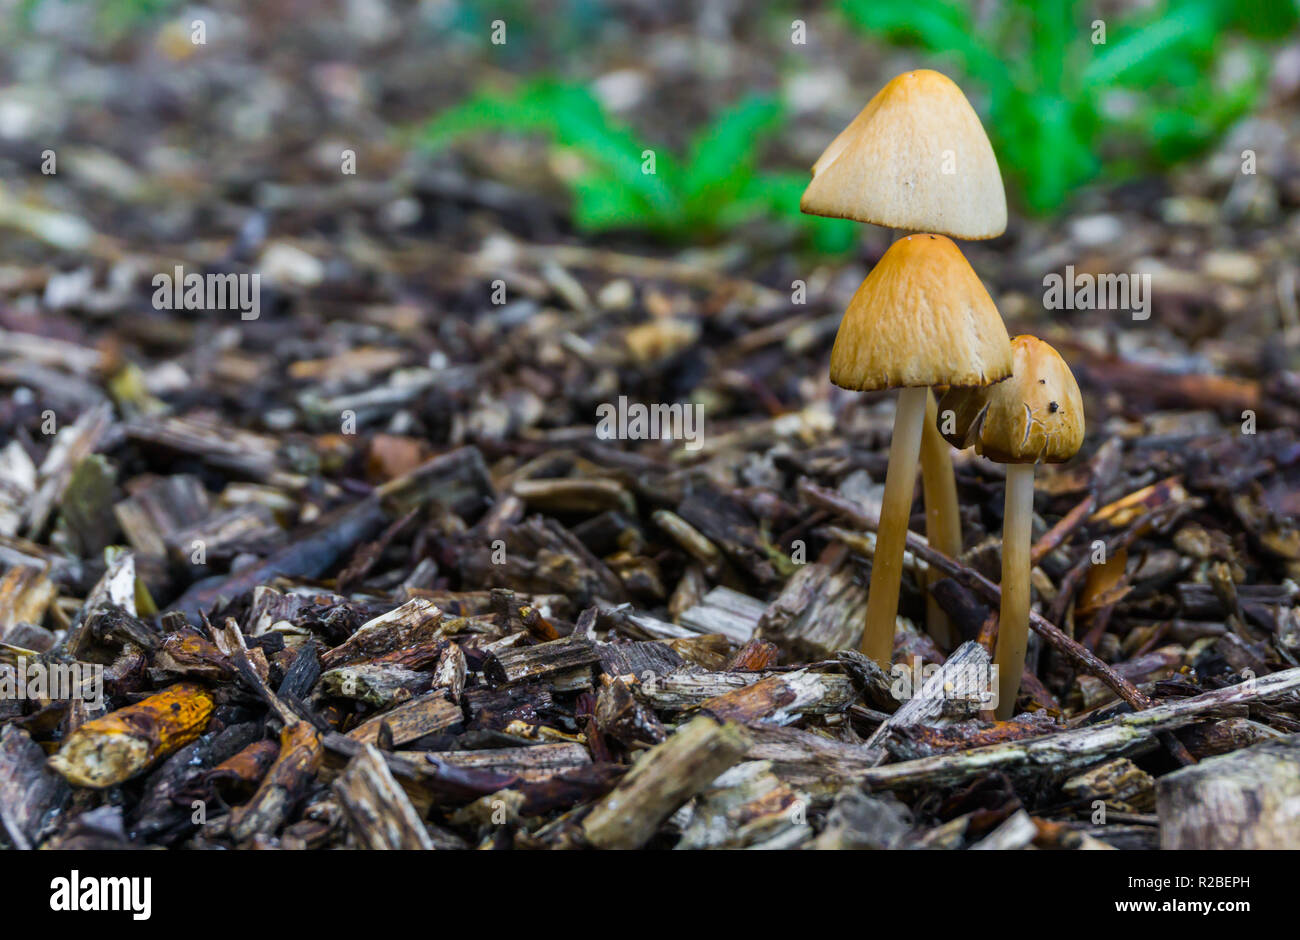 autumn season in the forest white dunce cap mushrooms in macro closeup forest background Stock Photo